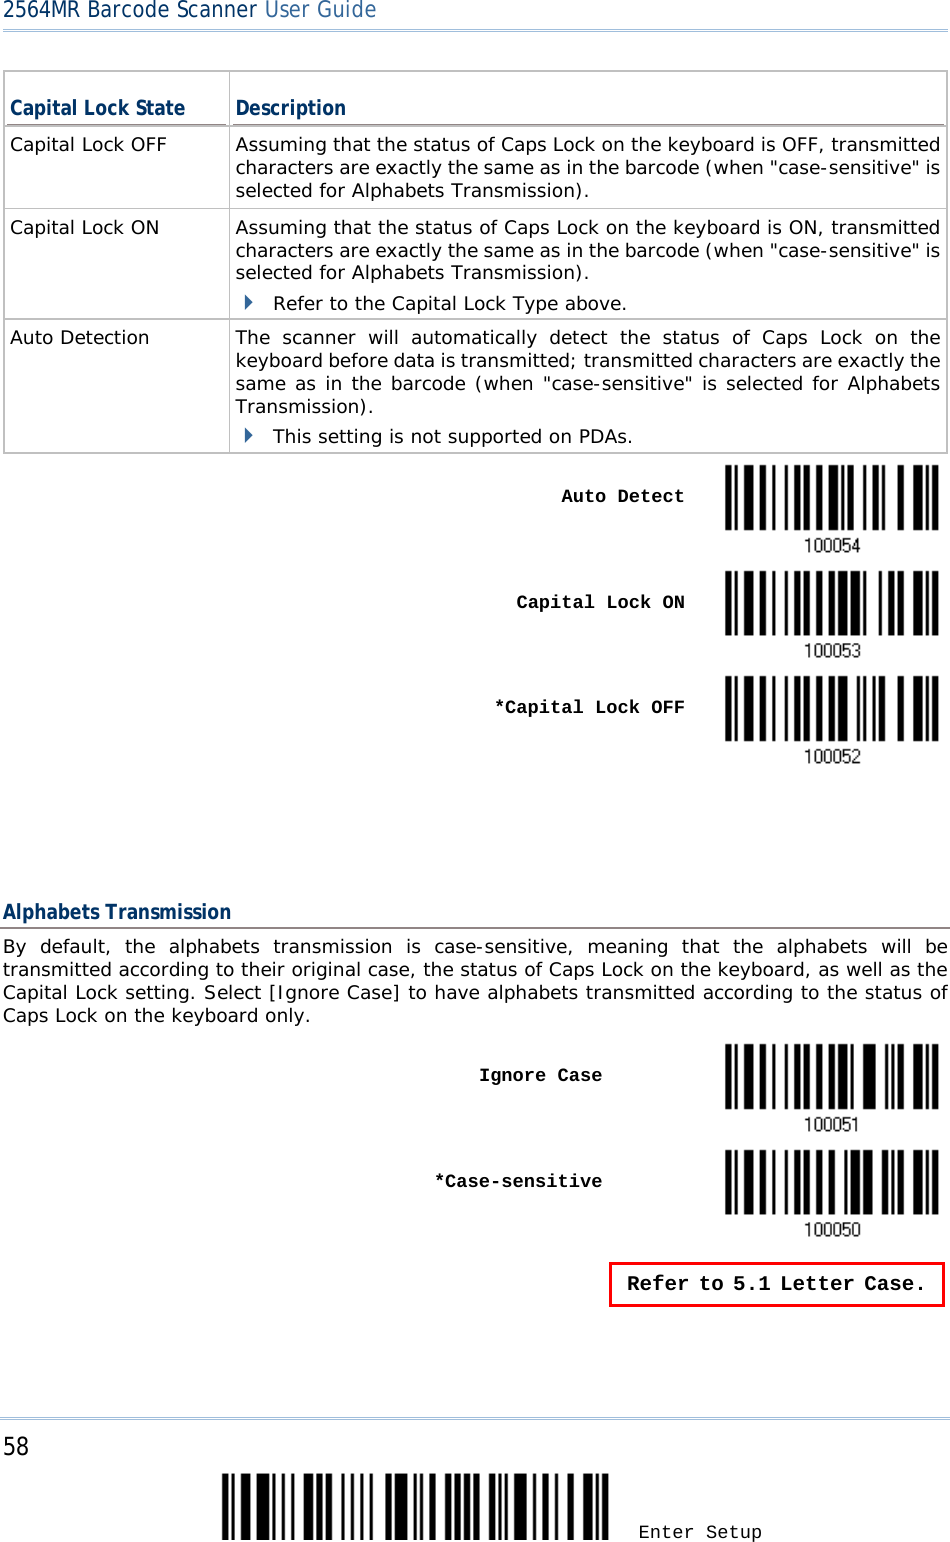 2564MR Barcode Scanner User Guide  Capital Lock State Description Capital Lock OFF Assuming that the status of Caps Lock on the keyboard is OFF, transmitted characters are exactly the same as in the barcode (when &quot;case-sensitive&quot; is selected for Alphabets Transmission). Capital Lock ON Assuming that the status of Caps Lock on the keyboard is ON, transmitted characters are exactly the same as in the barcode (when &quot;case-sensitive&quot; is selected for Alphabets Transmission).  Refer to the Capital Lock Type above. Auto Detection The scanner will automatically detect the status of Caps Lock on the keyboard before data is transmitted; transmitted characters are exactly the same as in the barcode (when &quot;case-sensitive&quot; is selected for Alphabets Transmission).  This setting is not supported on PDAs.     Auto Detect     Capital Lock ON     *Capital Lock OFF       Alphabets Transmission By default, the alphabets transmission is case-sensitive, meaning that the alphabets will be transmitted according to their original case, the status of Caps Lock on the keyboard, as well as the Capital Lock setting. Select [Ignore Case] to have alphabets transmitted according to the status of Caps Lock on the keyboard only.    Ignore Case     *Case-sensitive   Refer to 5.1 Letter Case.  58 Enter Setup 